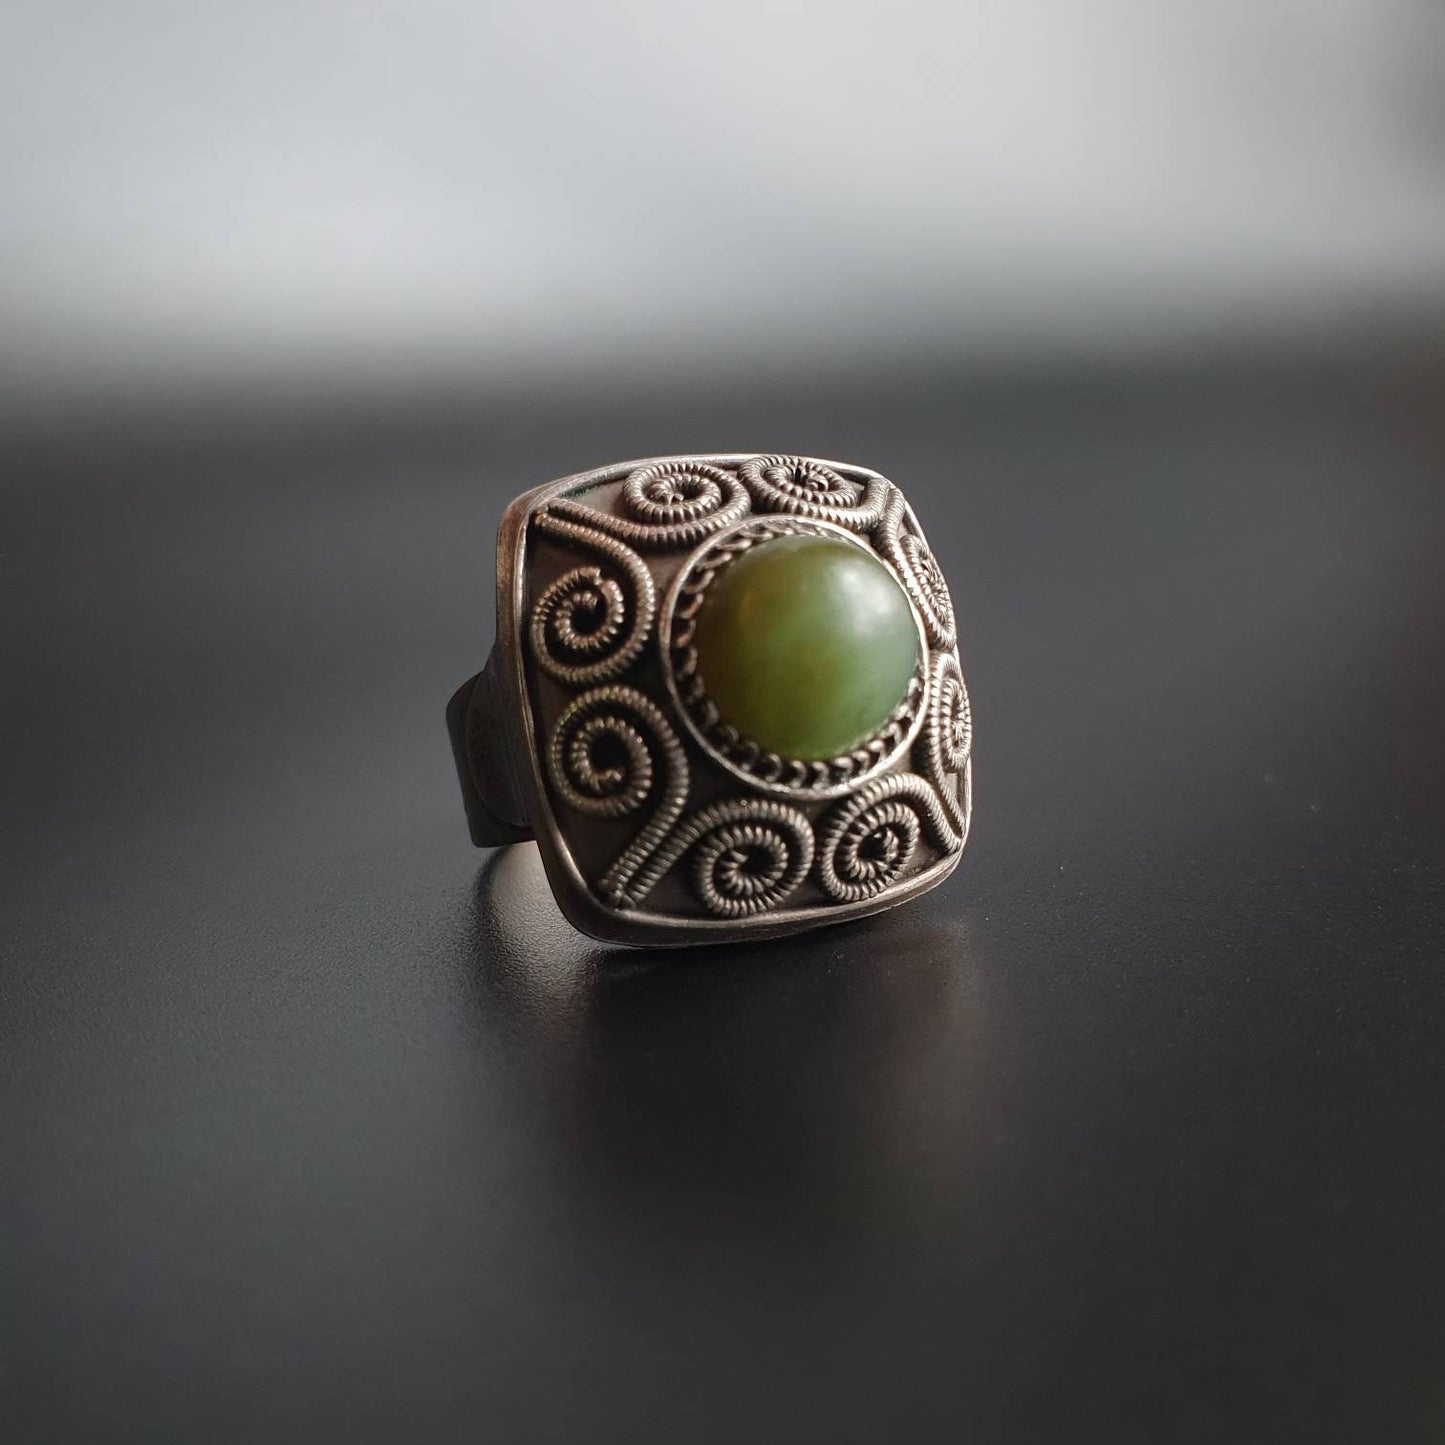 Gothic ring, sterling silver ring, statement ring, chunky ring, historical jewelry, gifts,jade gemstone, healing gemstone, unique jewelry